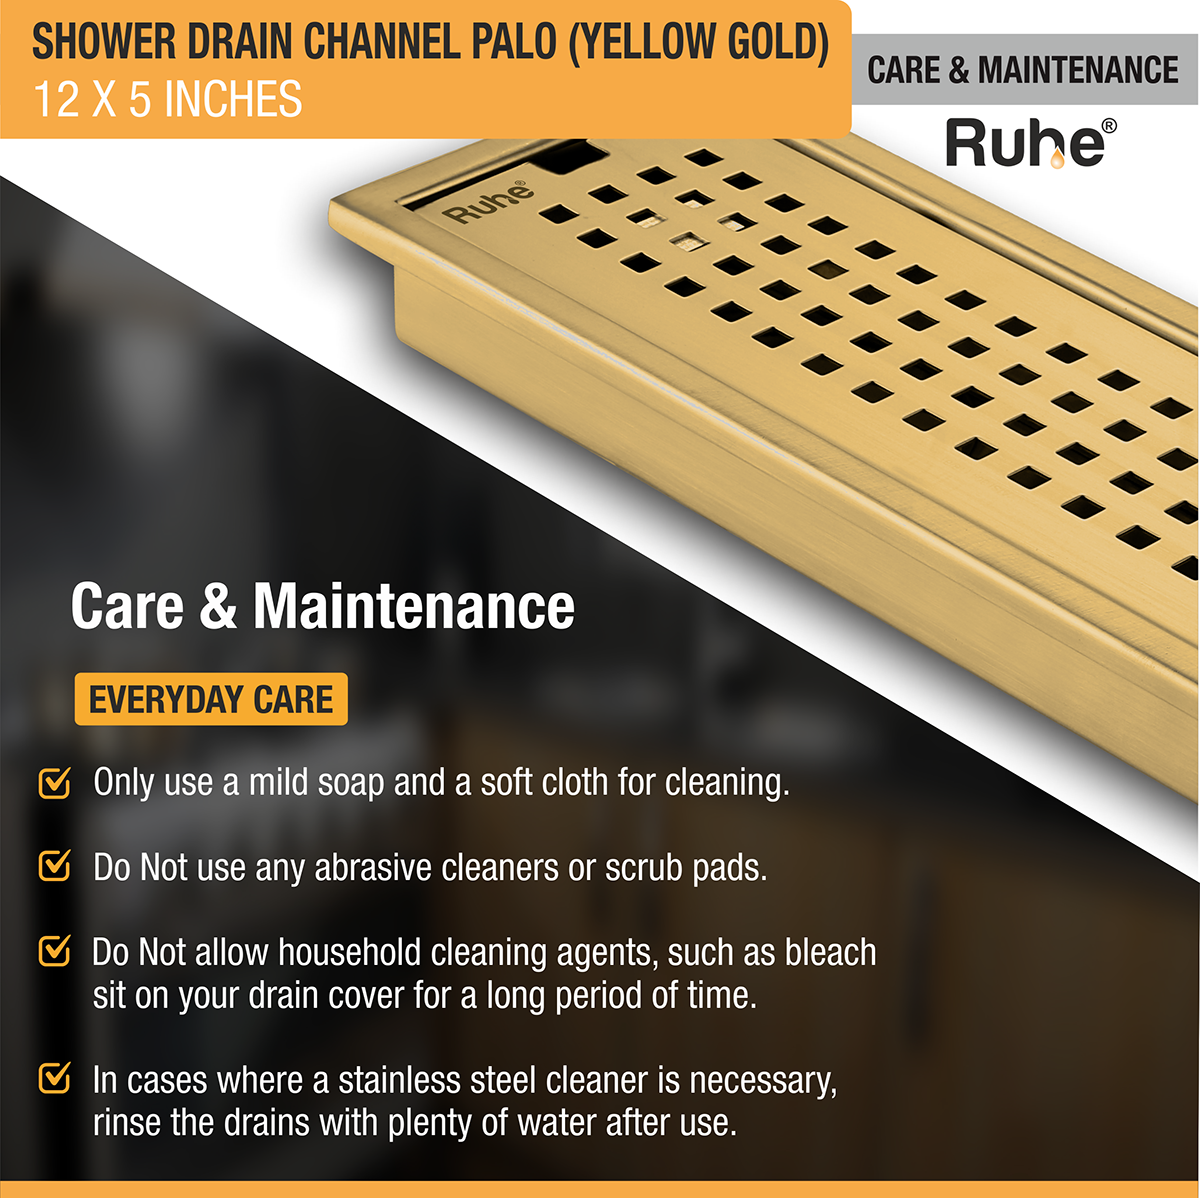 Palo Shower Drain Channel (12 x 5 Inches) YELLOW GOLD care and maintenance